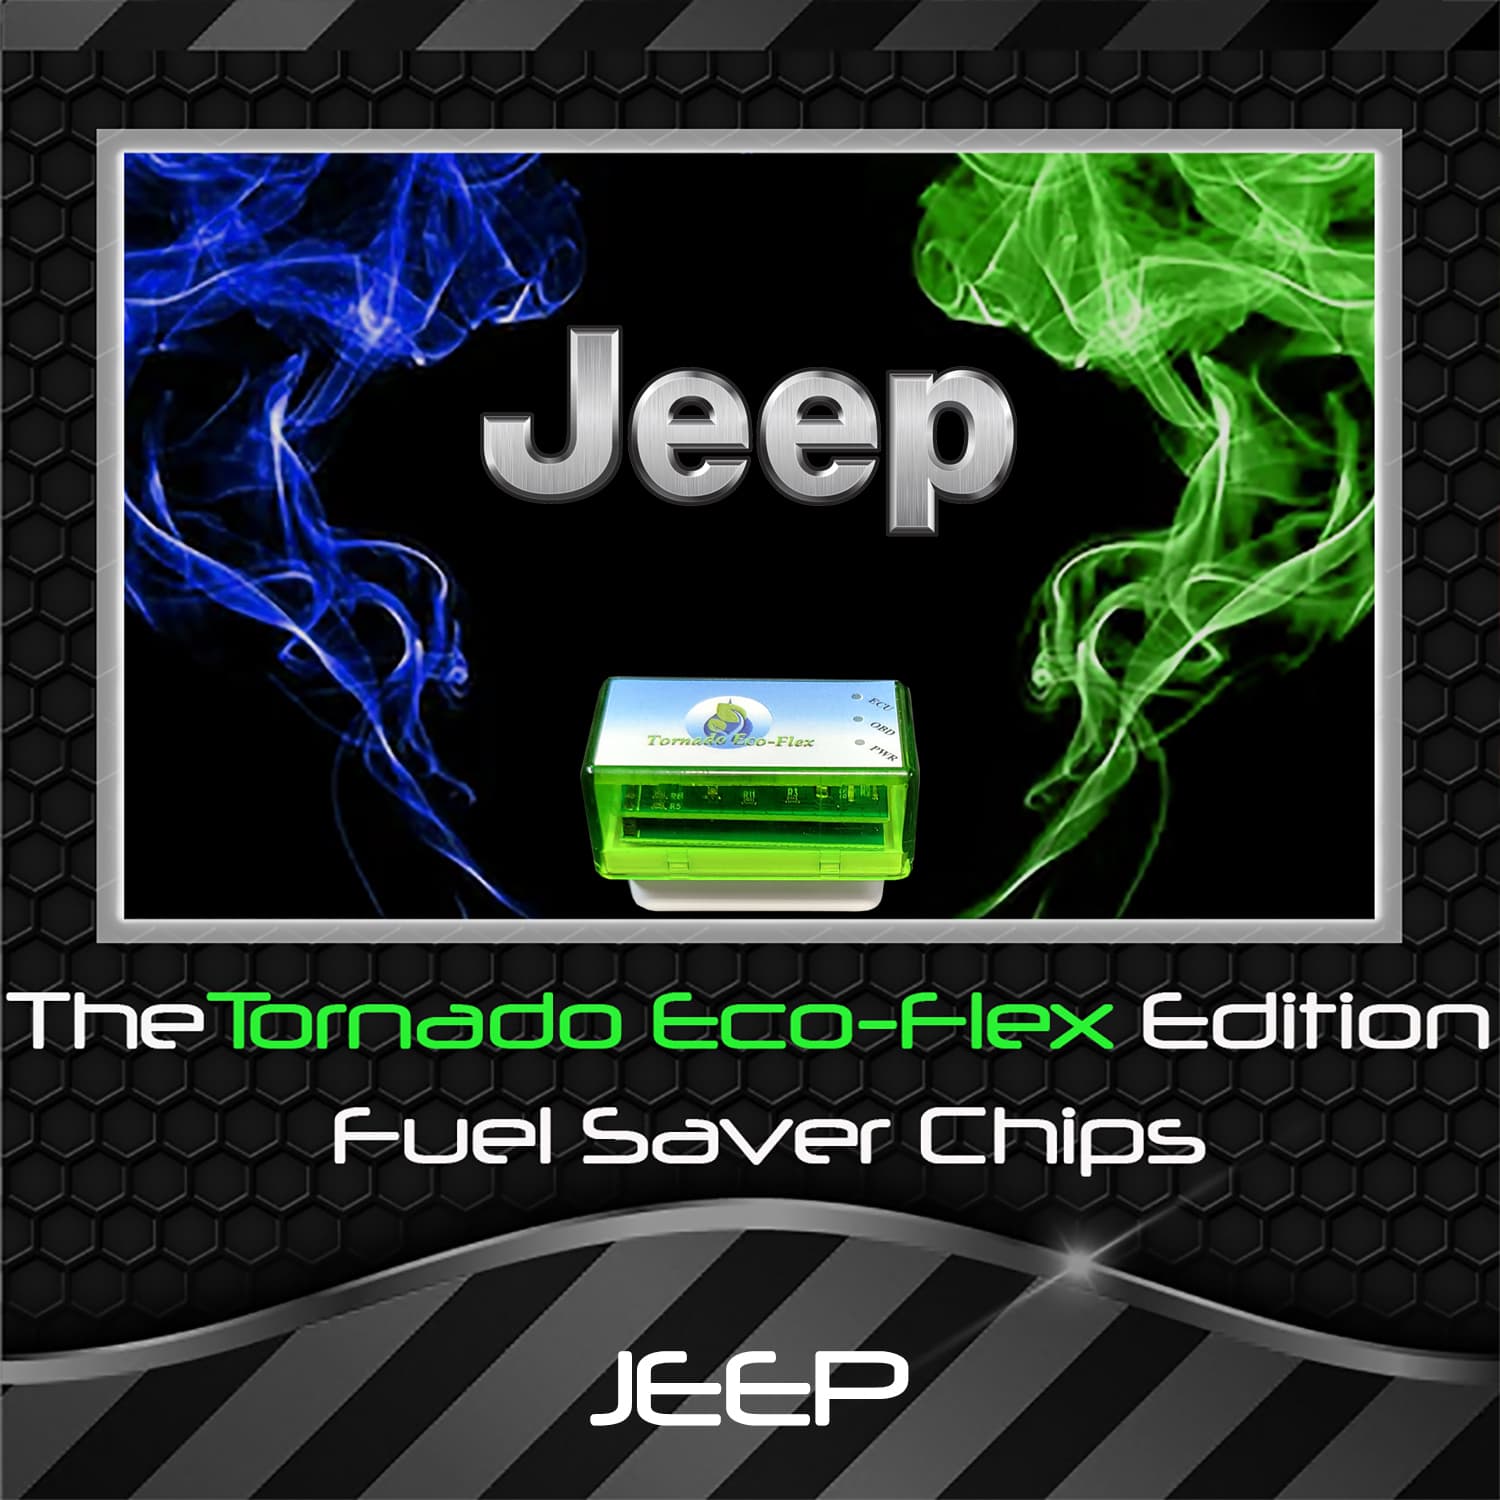 Jeep Fuel Saver Chips